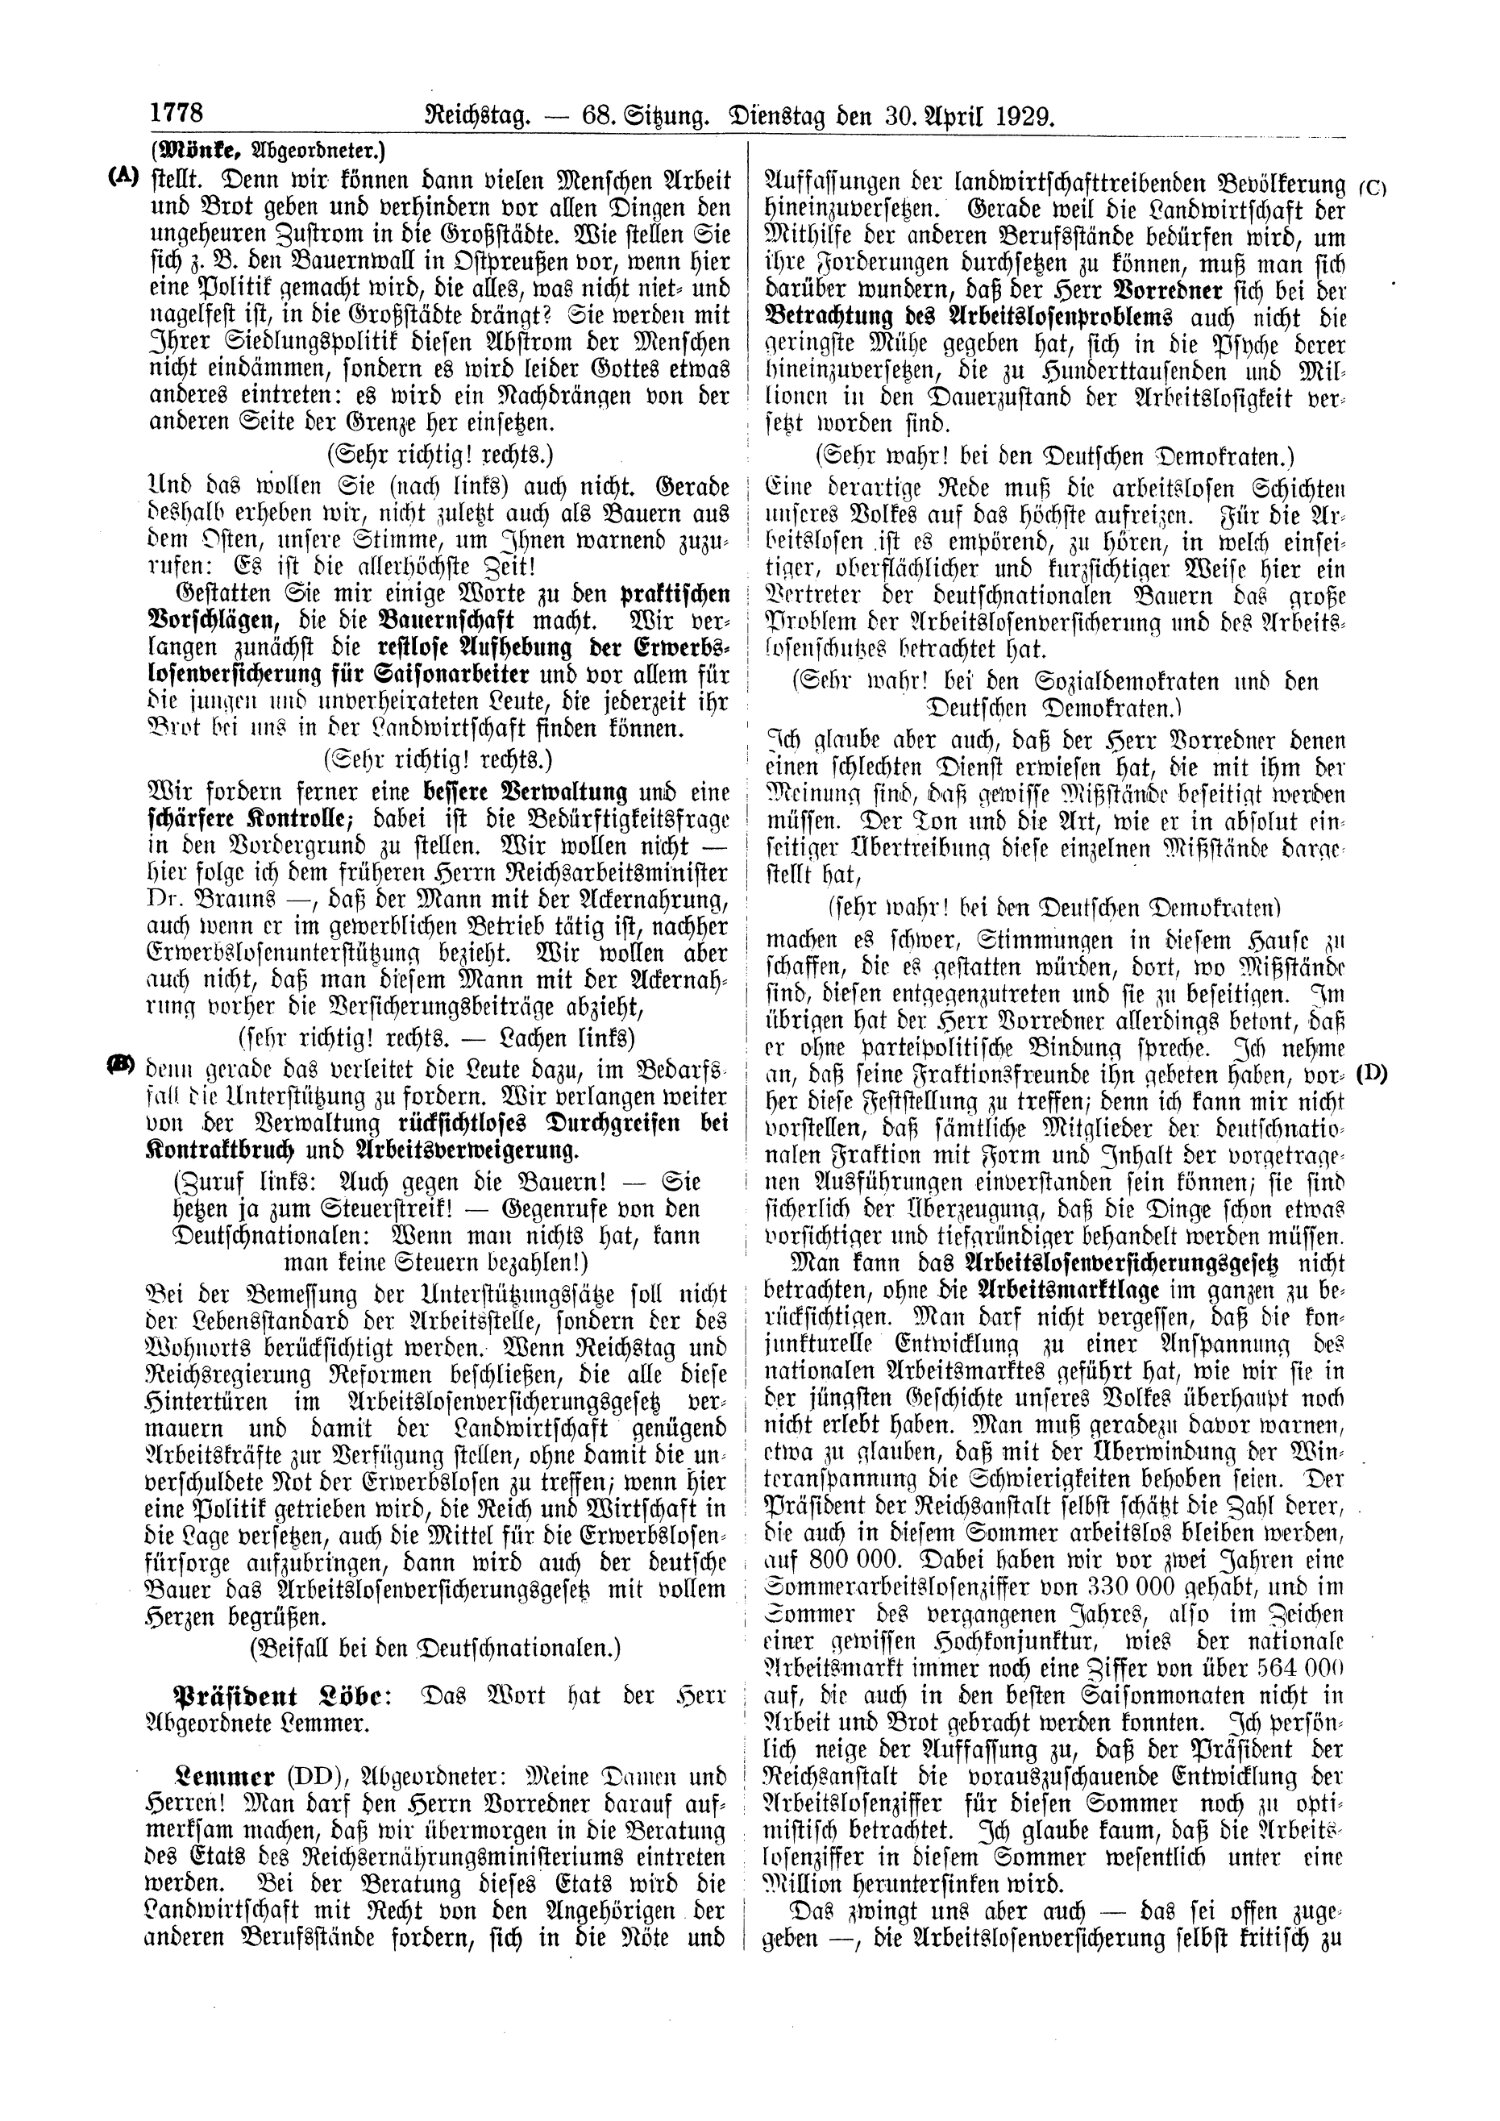 Scan of page 1778